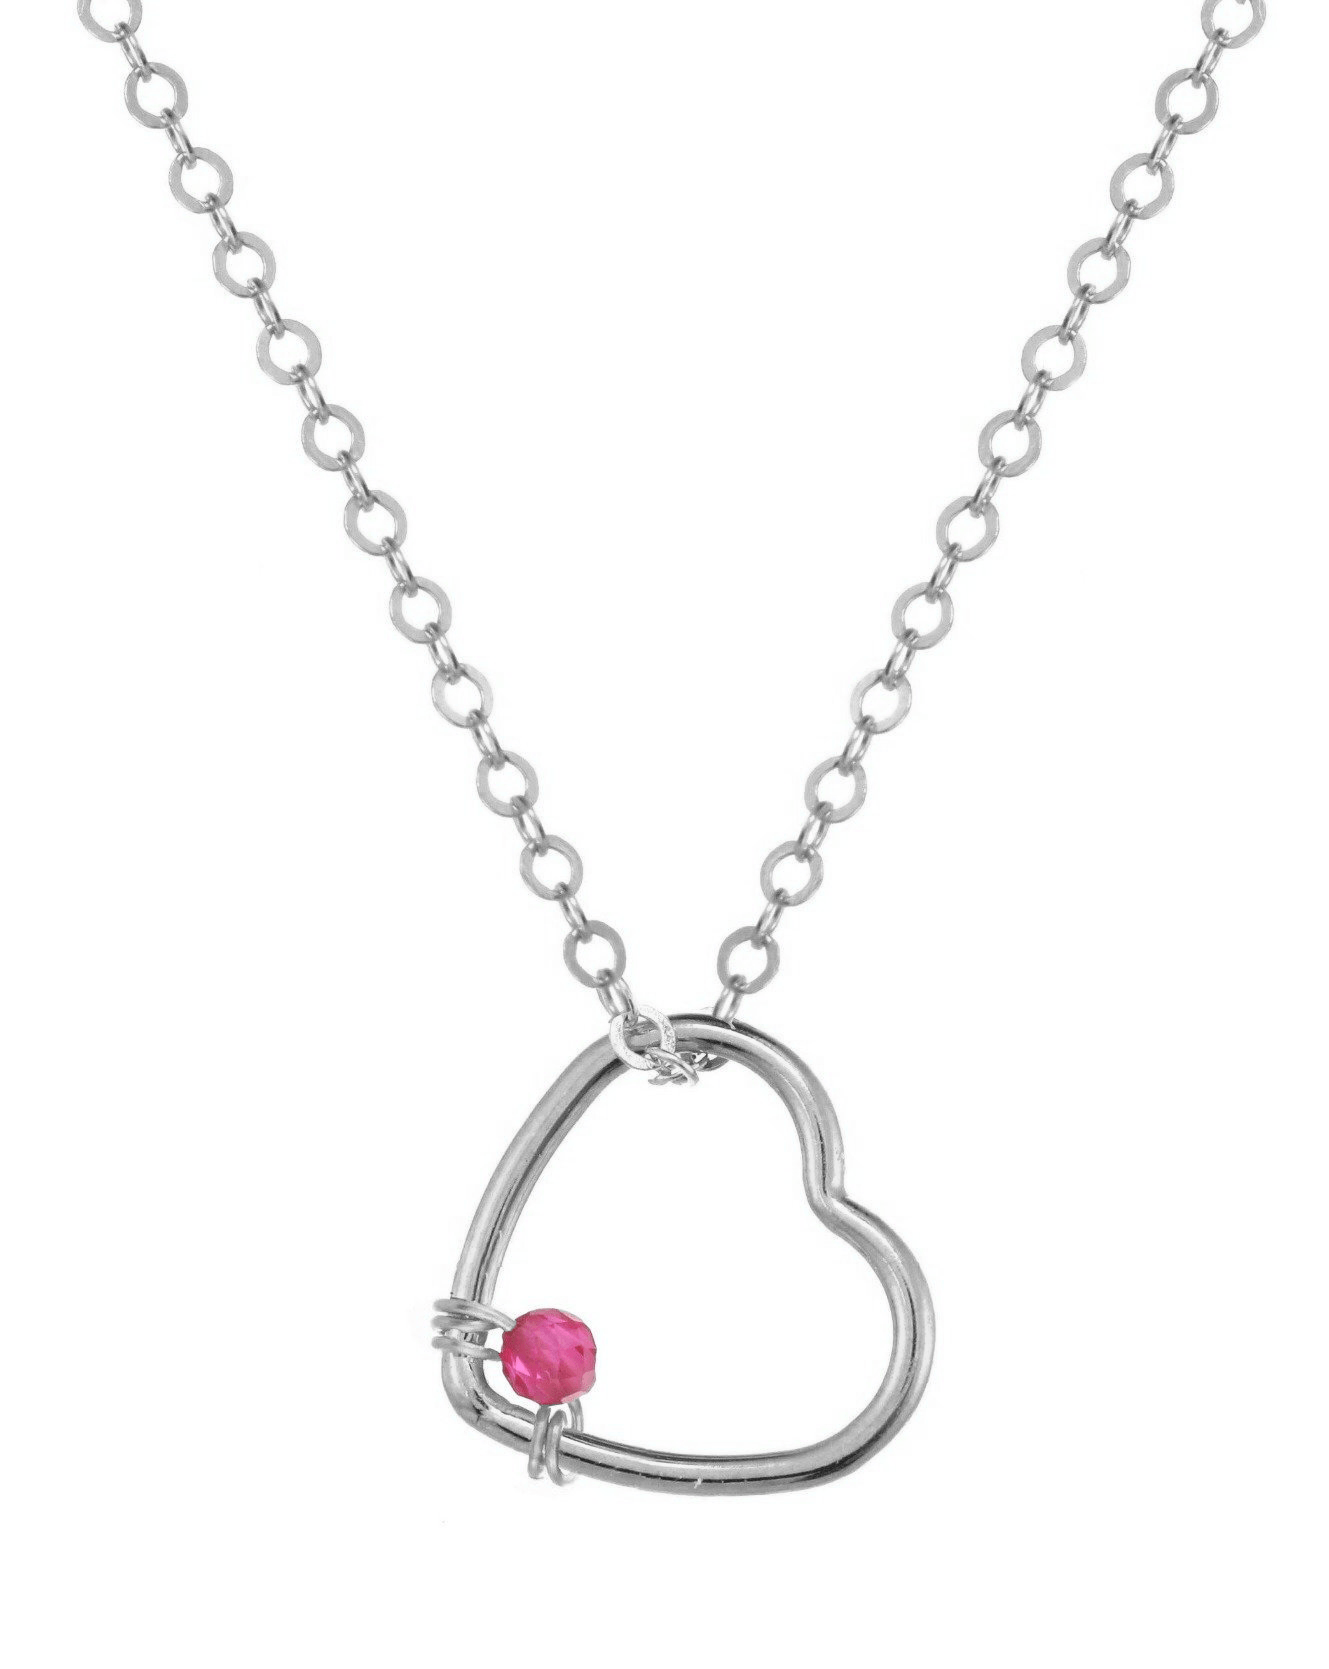 Amorcito Necklace by KOZAKH. A 16 to 18 inch adjustable length necklace in Sterling Silver, featuring a heart shaped charm with a round Ruby gem.